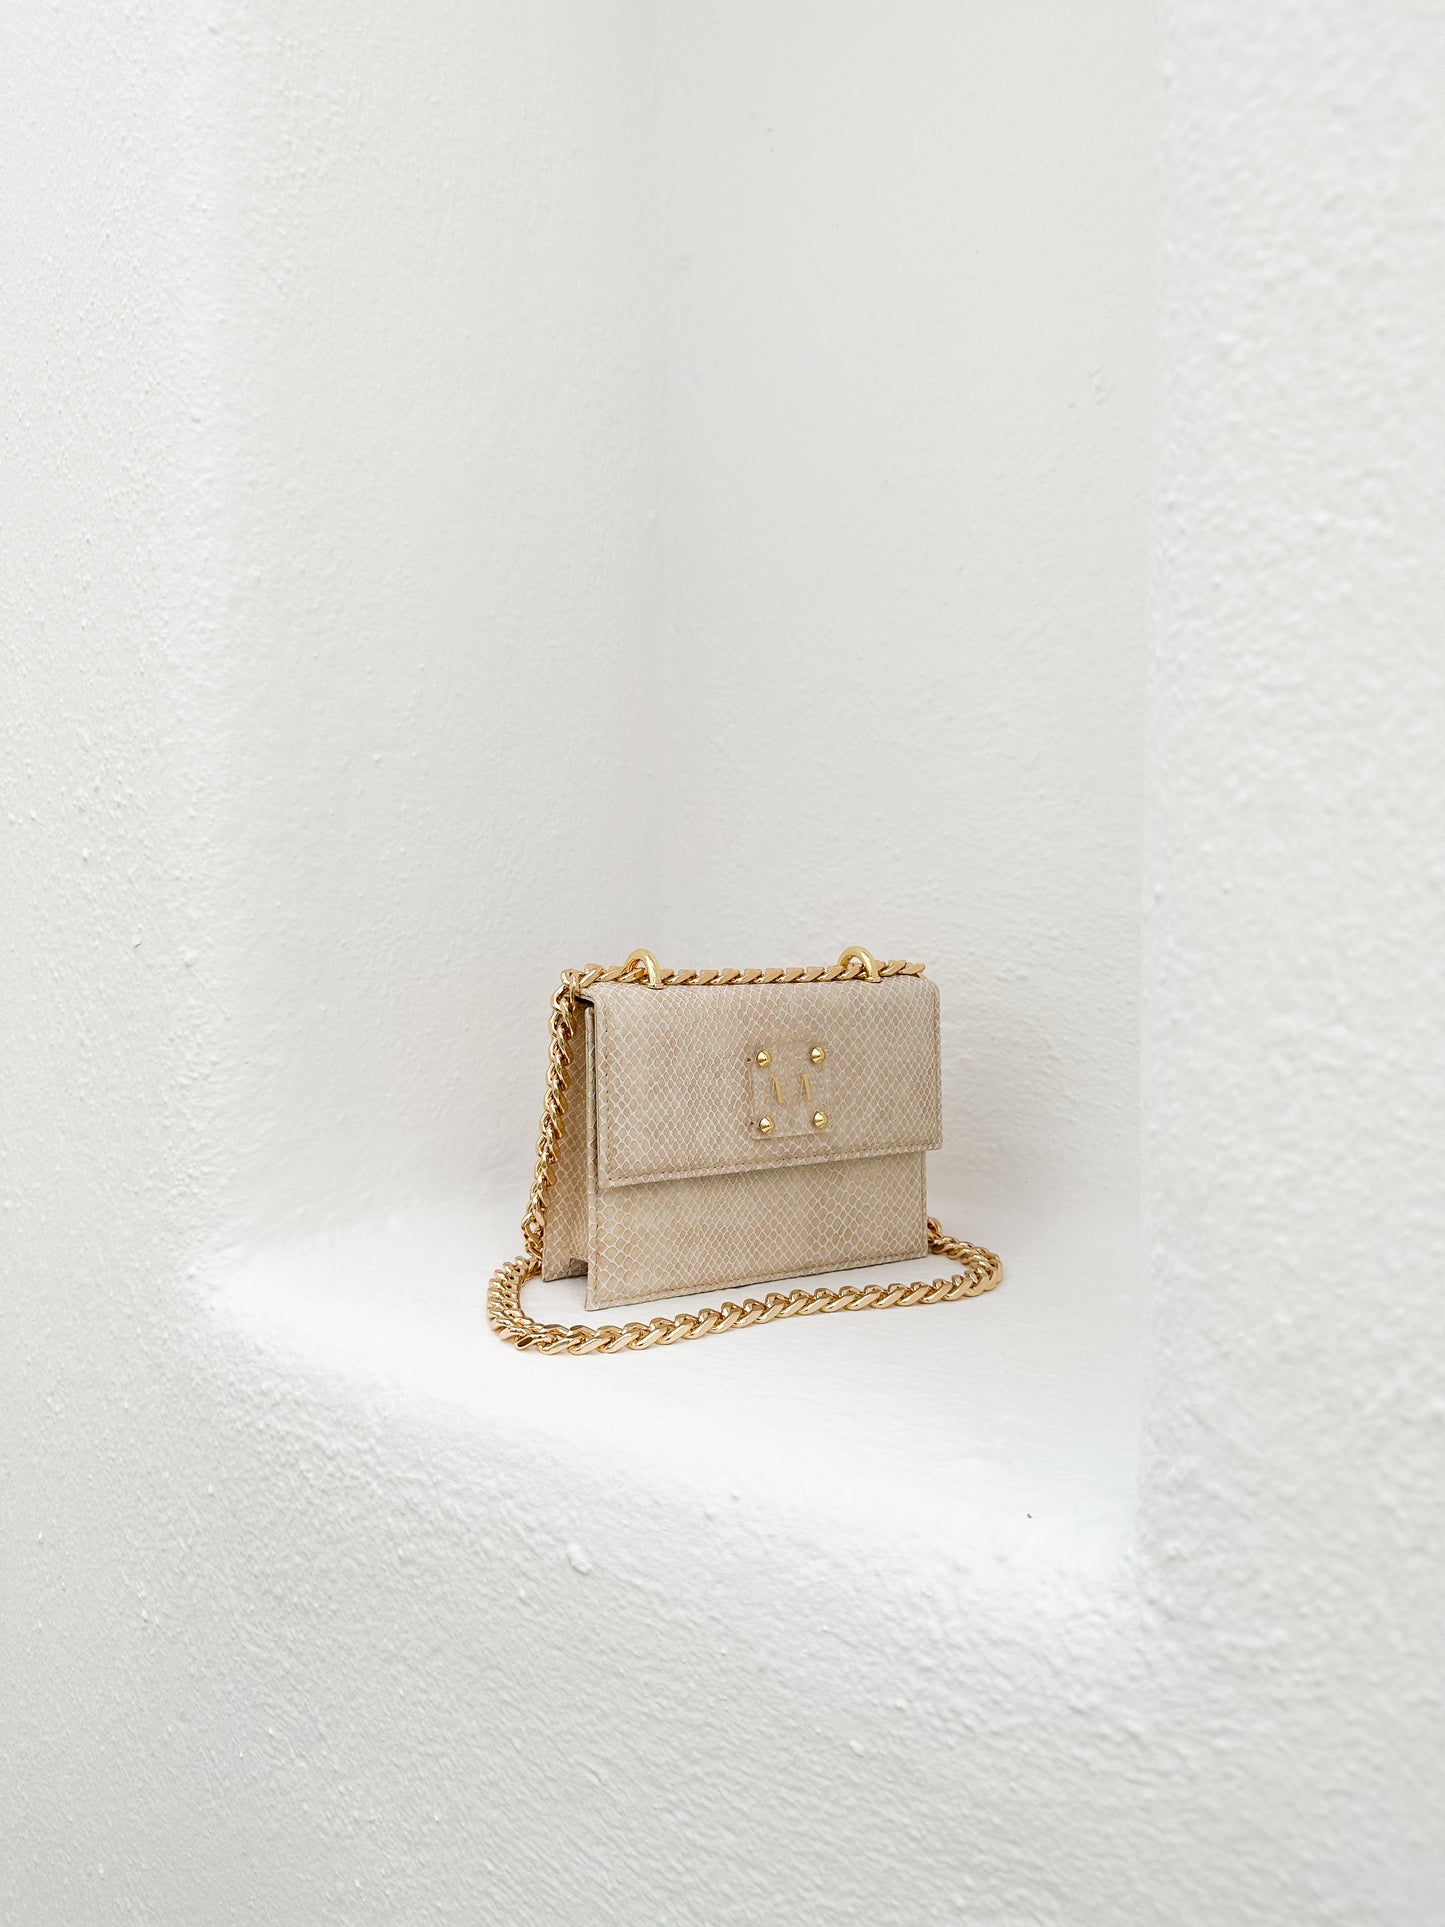 JUNE BAG  |  TAUPE-NUDE SNAKE EMBOSSED LEATHER